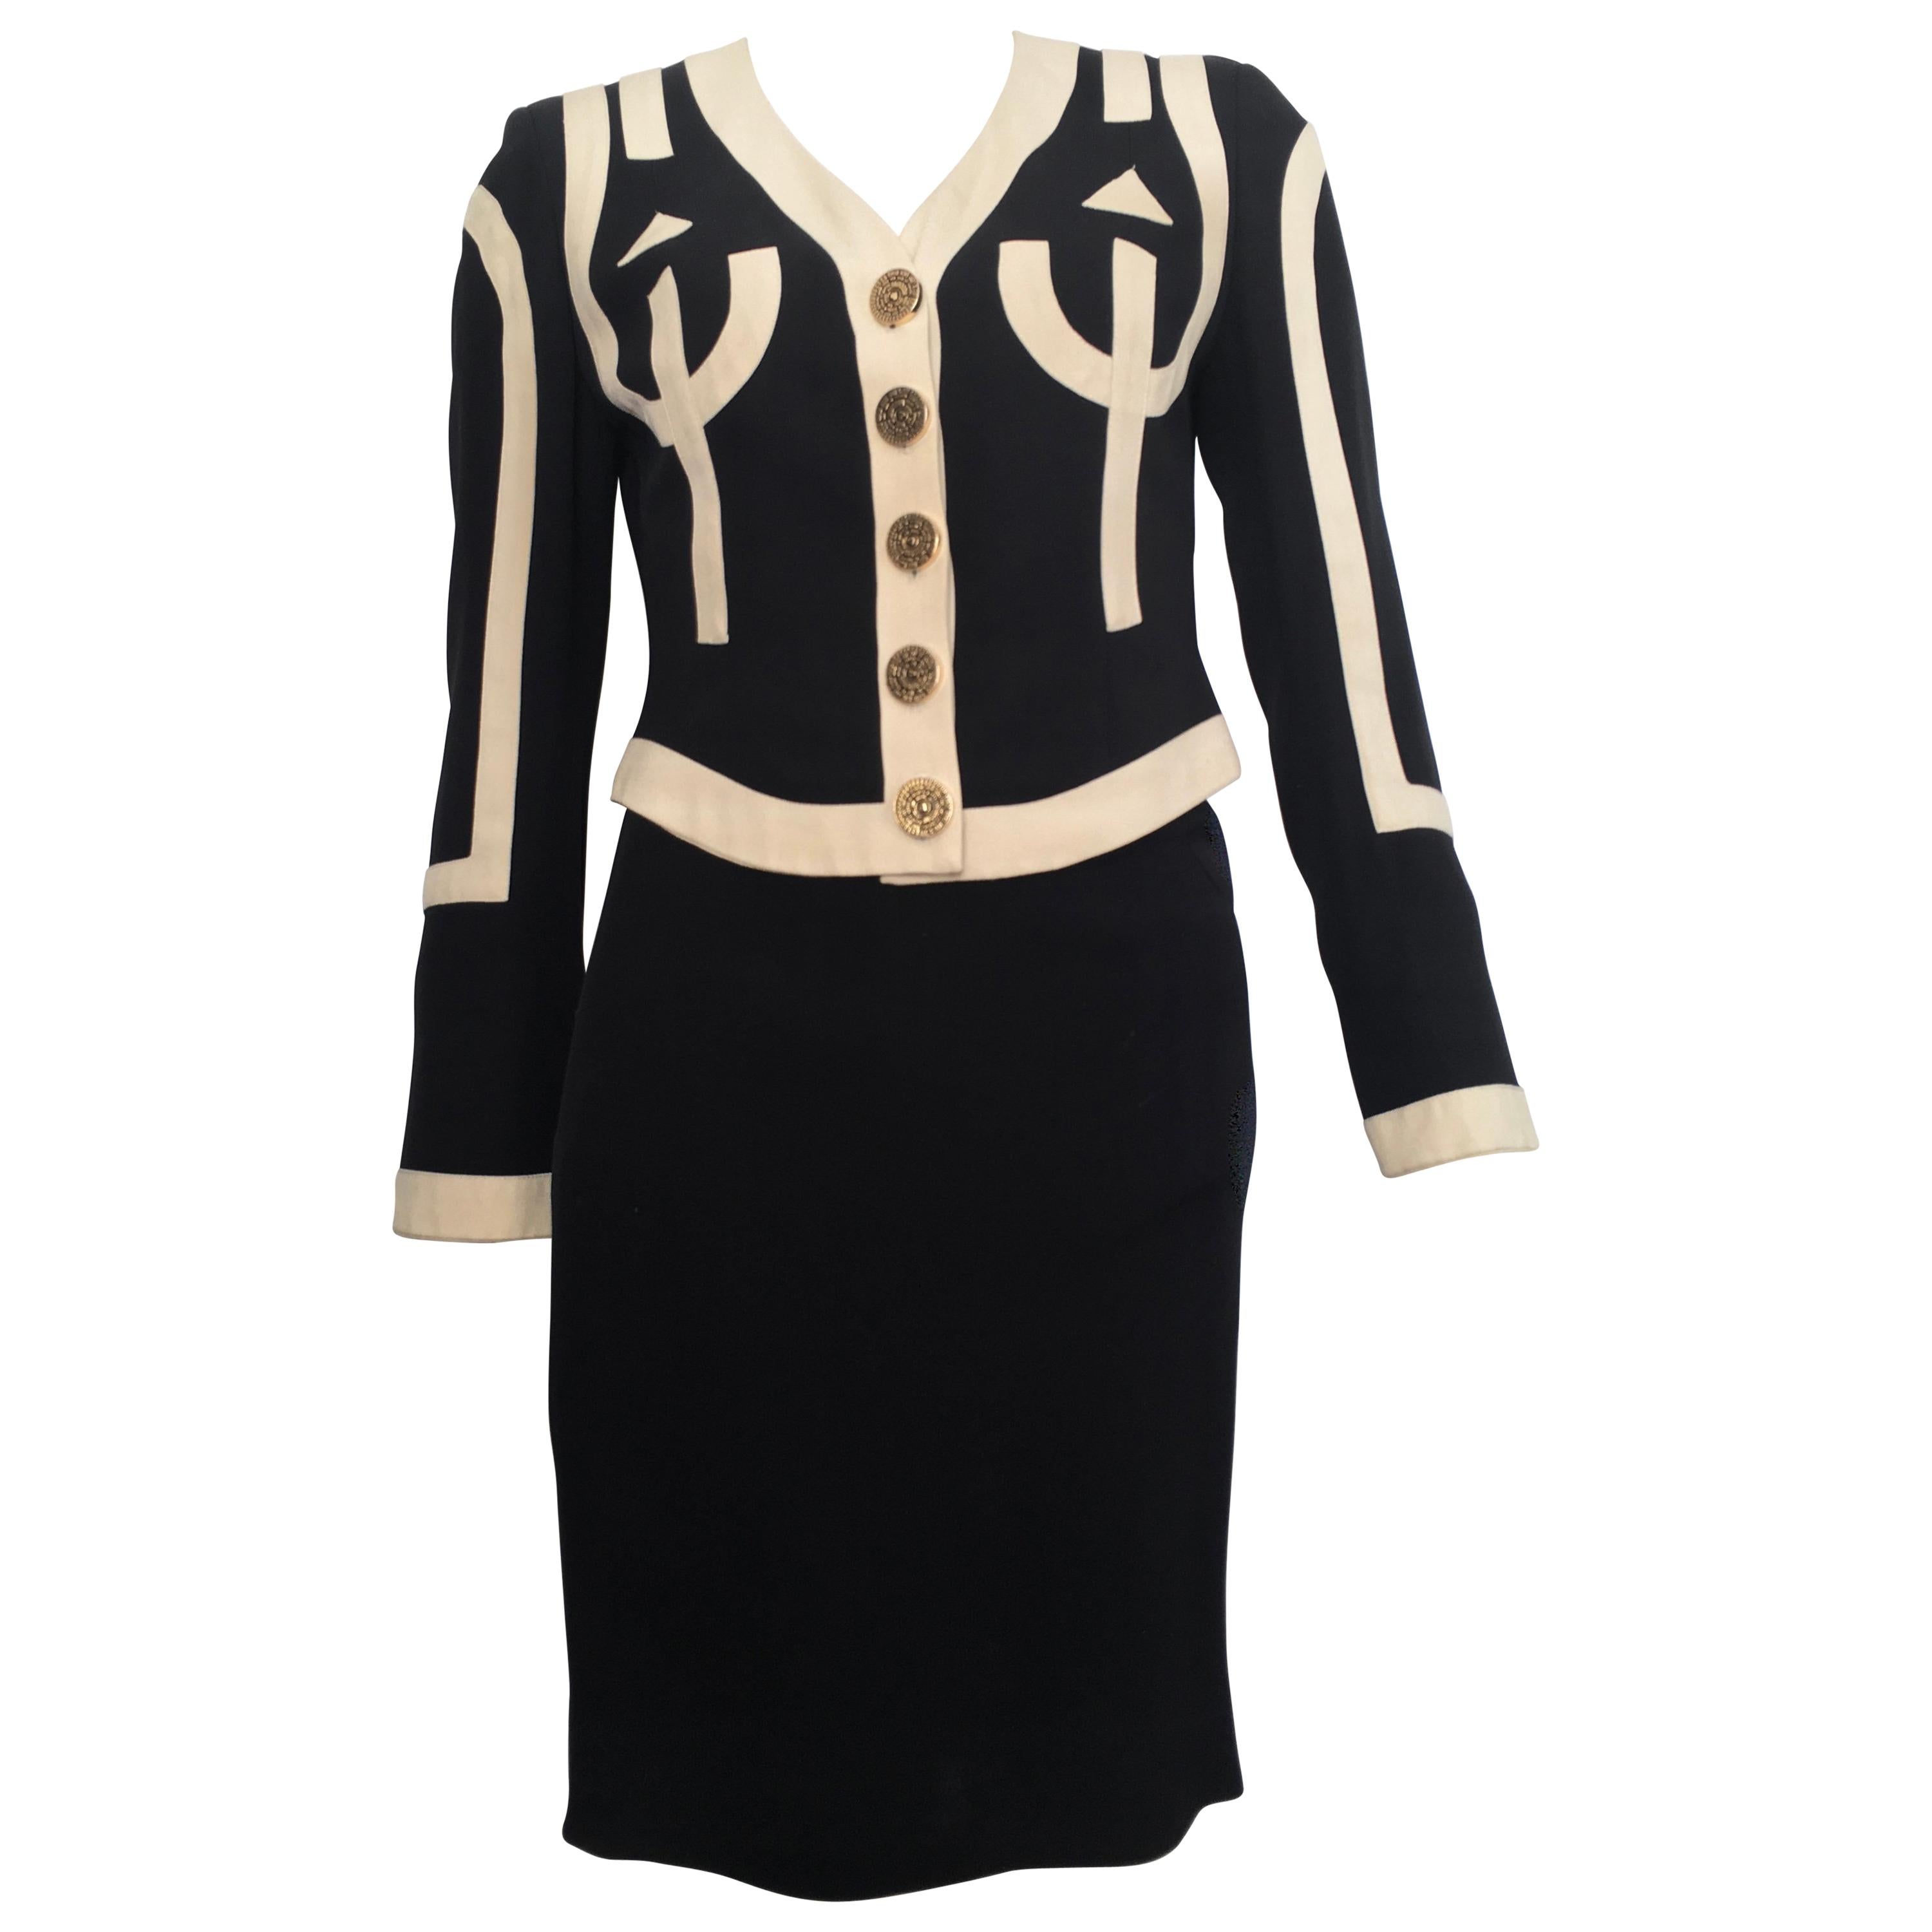 Moschino 1990s Black & Cream Jacket & Skirt Suit Size 4. For Sale